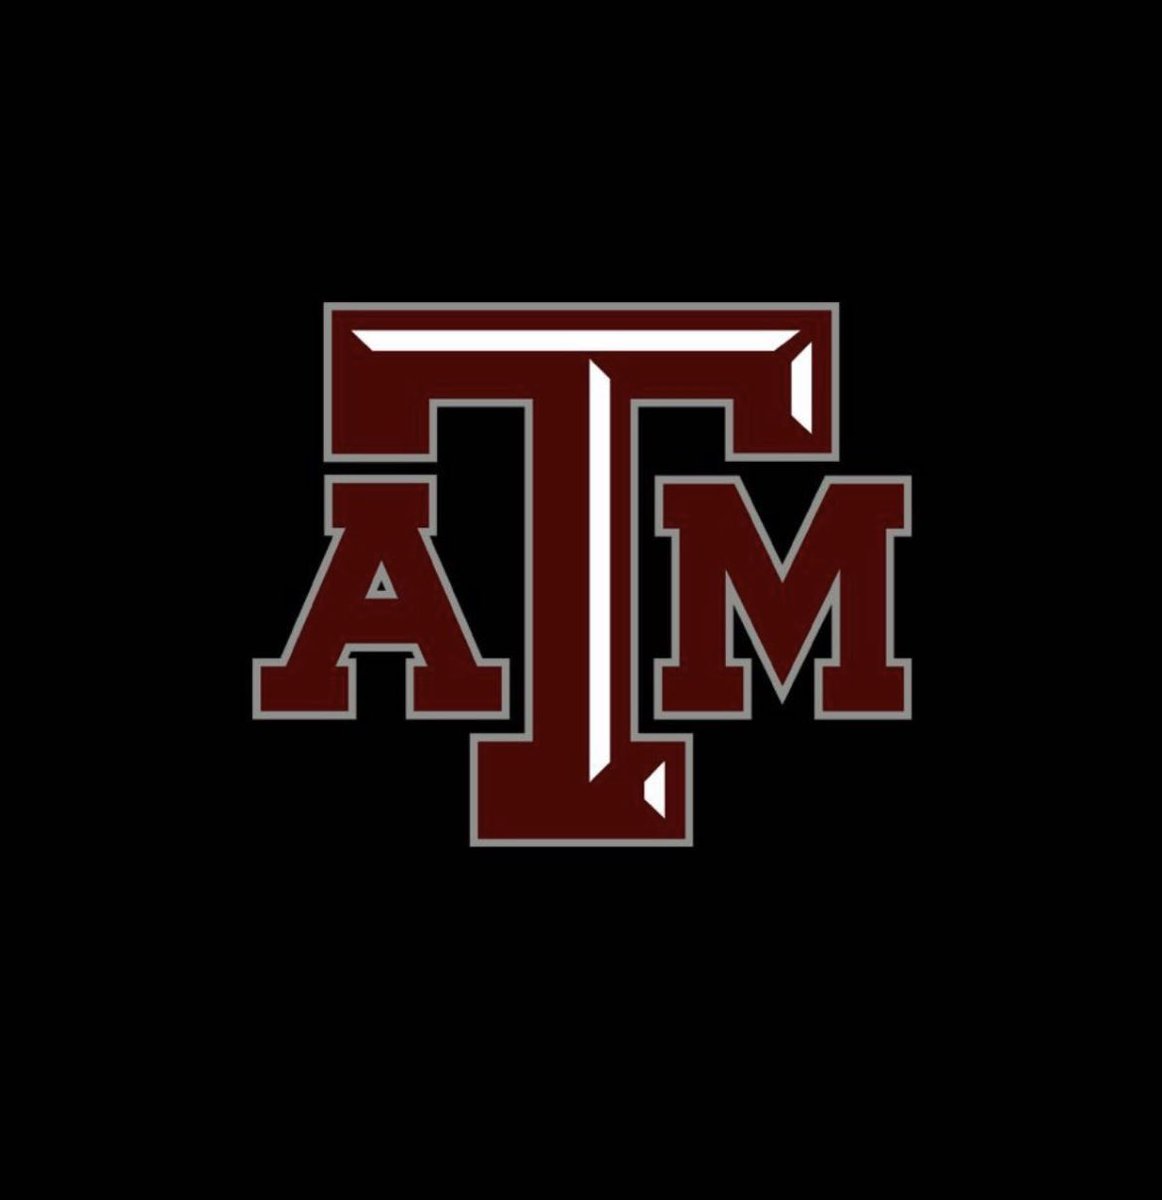 #AGTG Blessed to receive a(n) offer from Texas A&M University @AggieFootball @mikekirschner1 @ChadSimmons_ @TomLoy247 @KyleNeddenriep @cdc372 @WarriorNation_1 @WARRENCENTRALFB